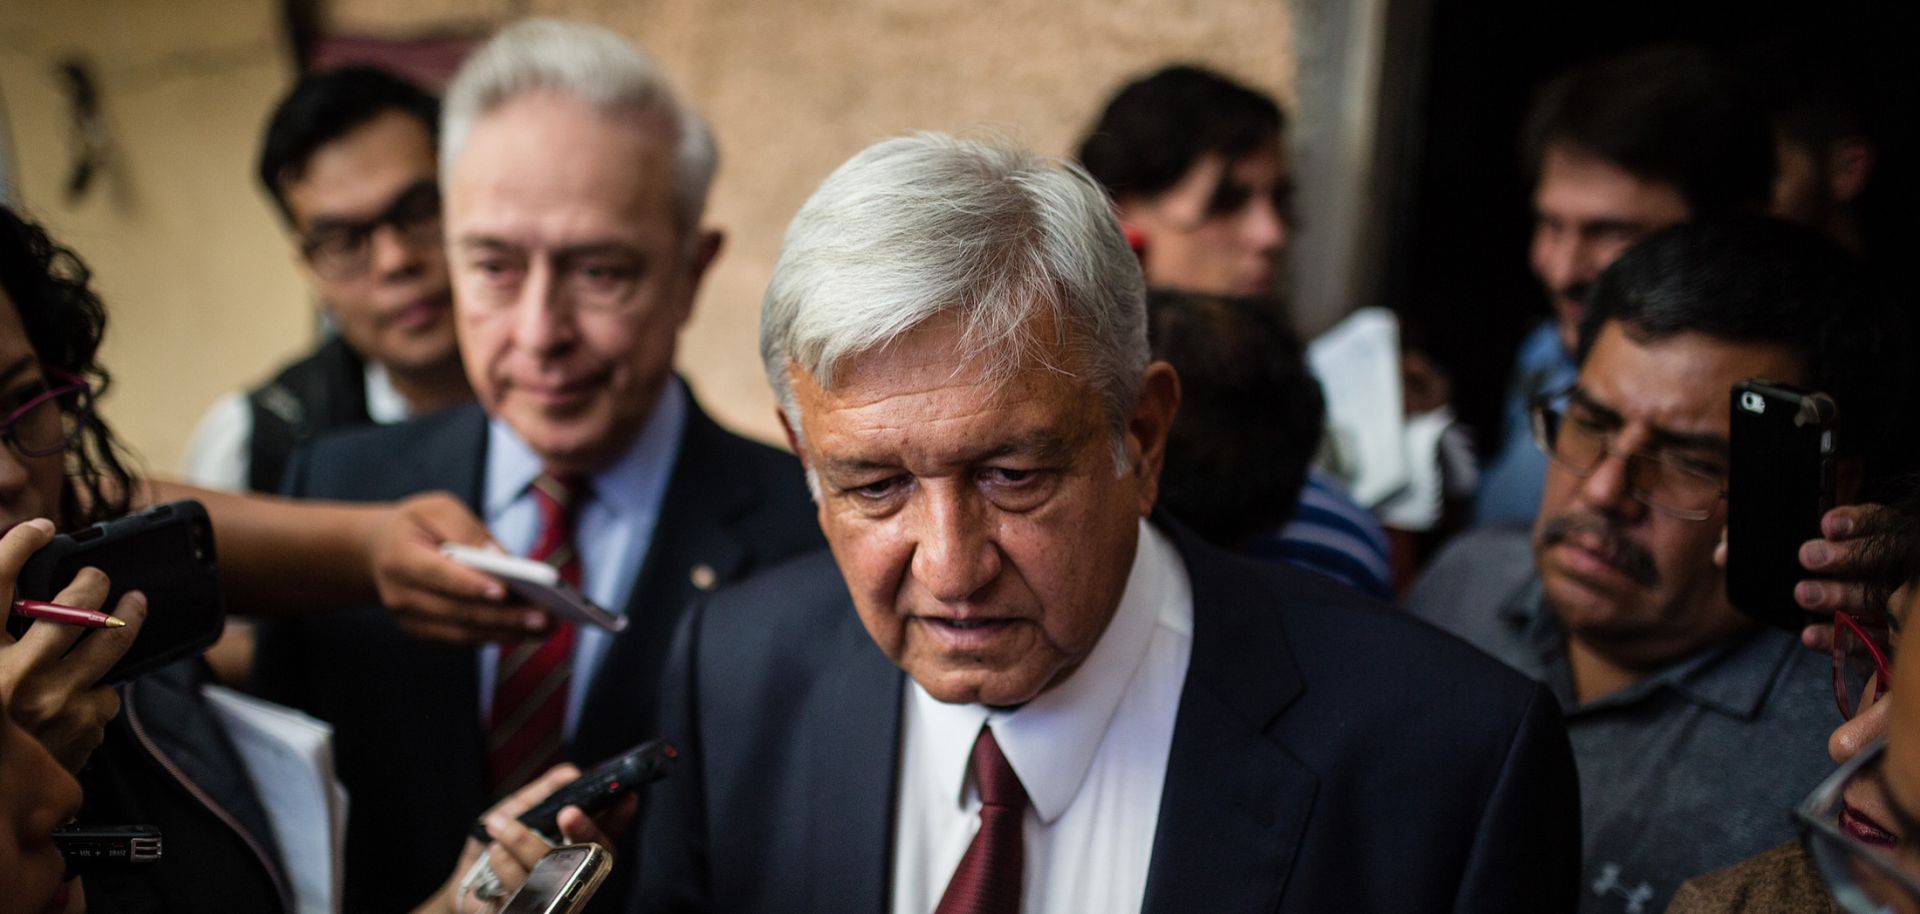 Mexican President-elect Andres Manuel Lopez Obrador speaks to reporters in Mexico City on July 5, 2018, to announce that his pick for foreign minister is former Mexico City Mayor Marcelo Ebrard.